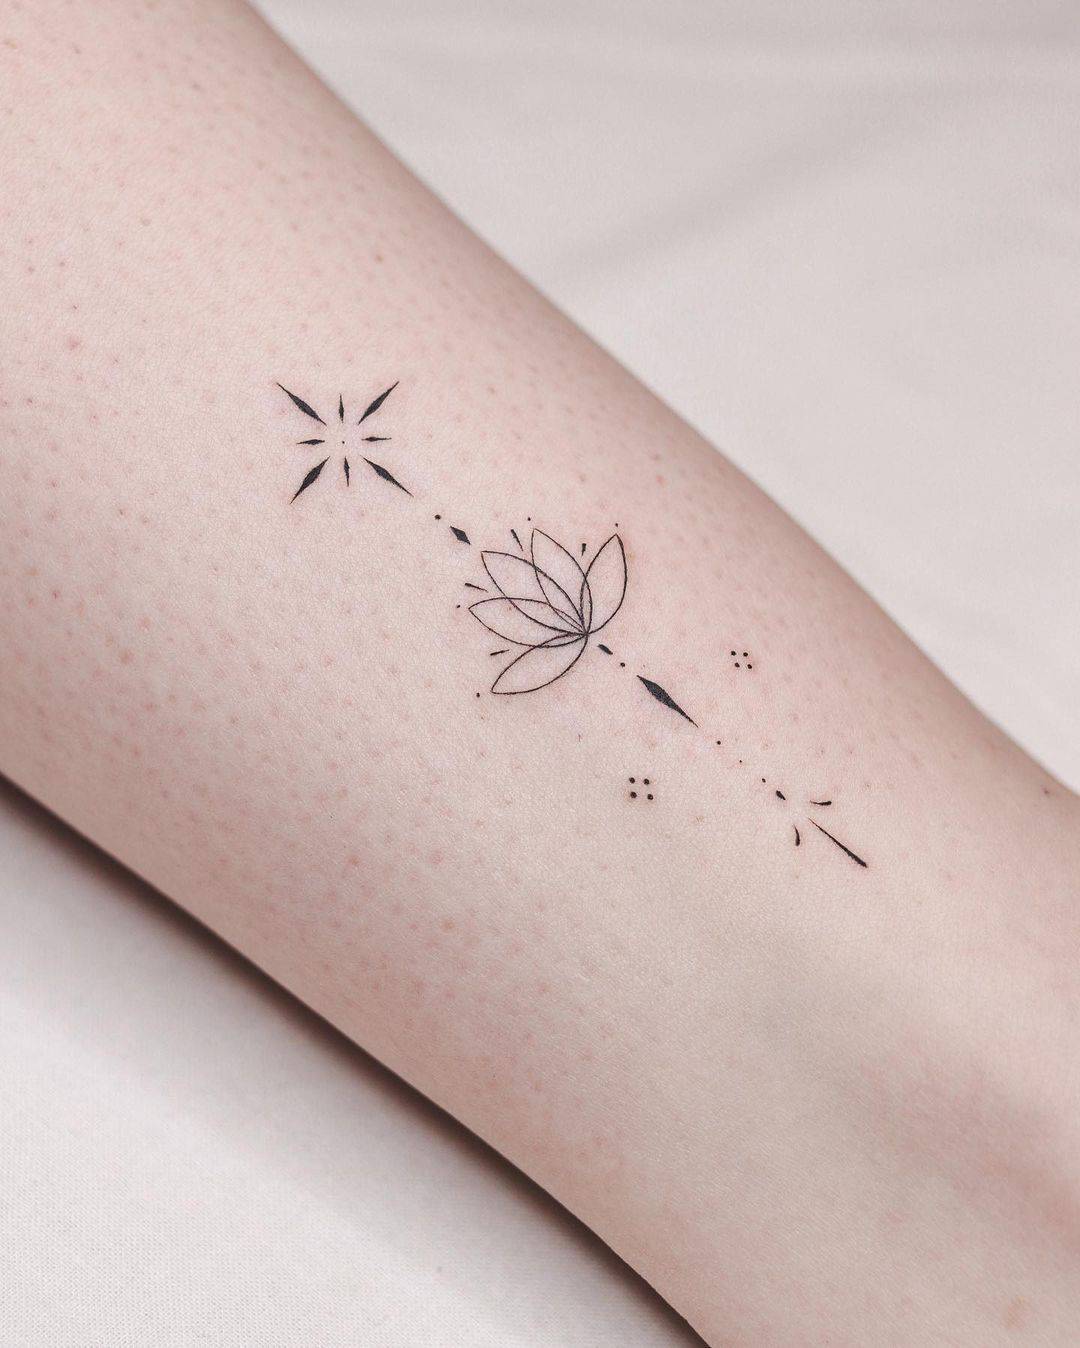 Lotus tattoo with star on arm by orma tattoo